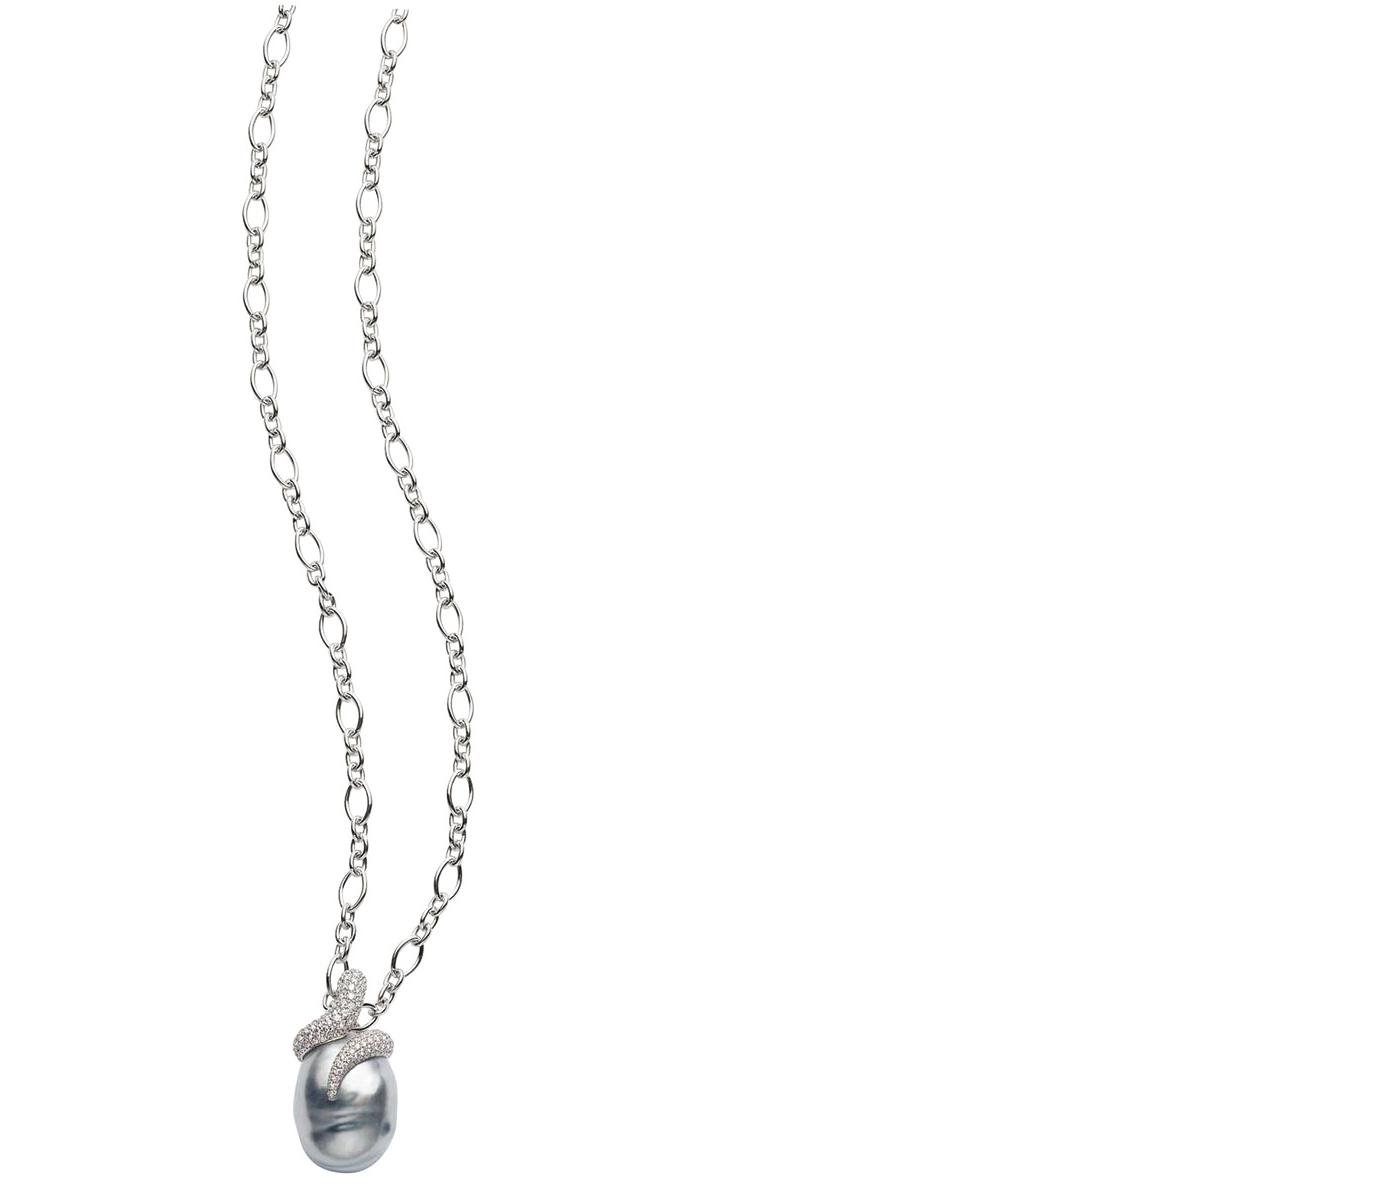 Necklace by Mikimoto